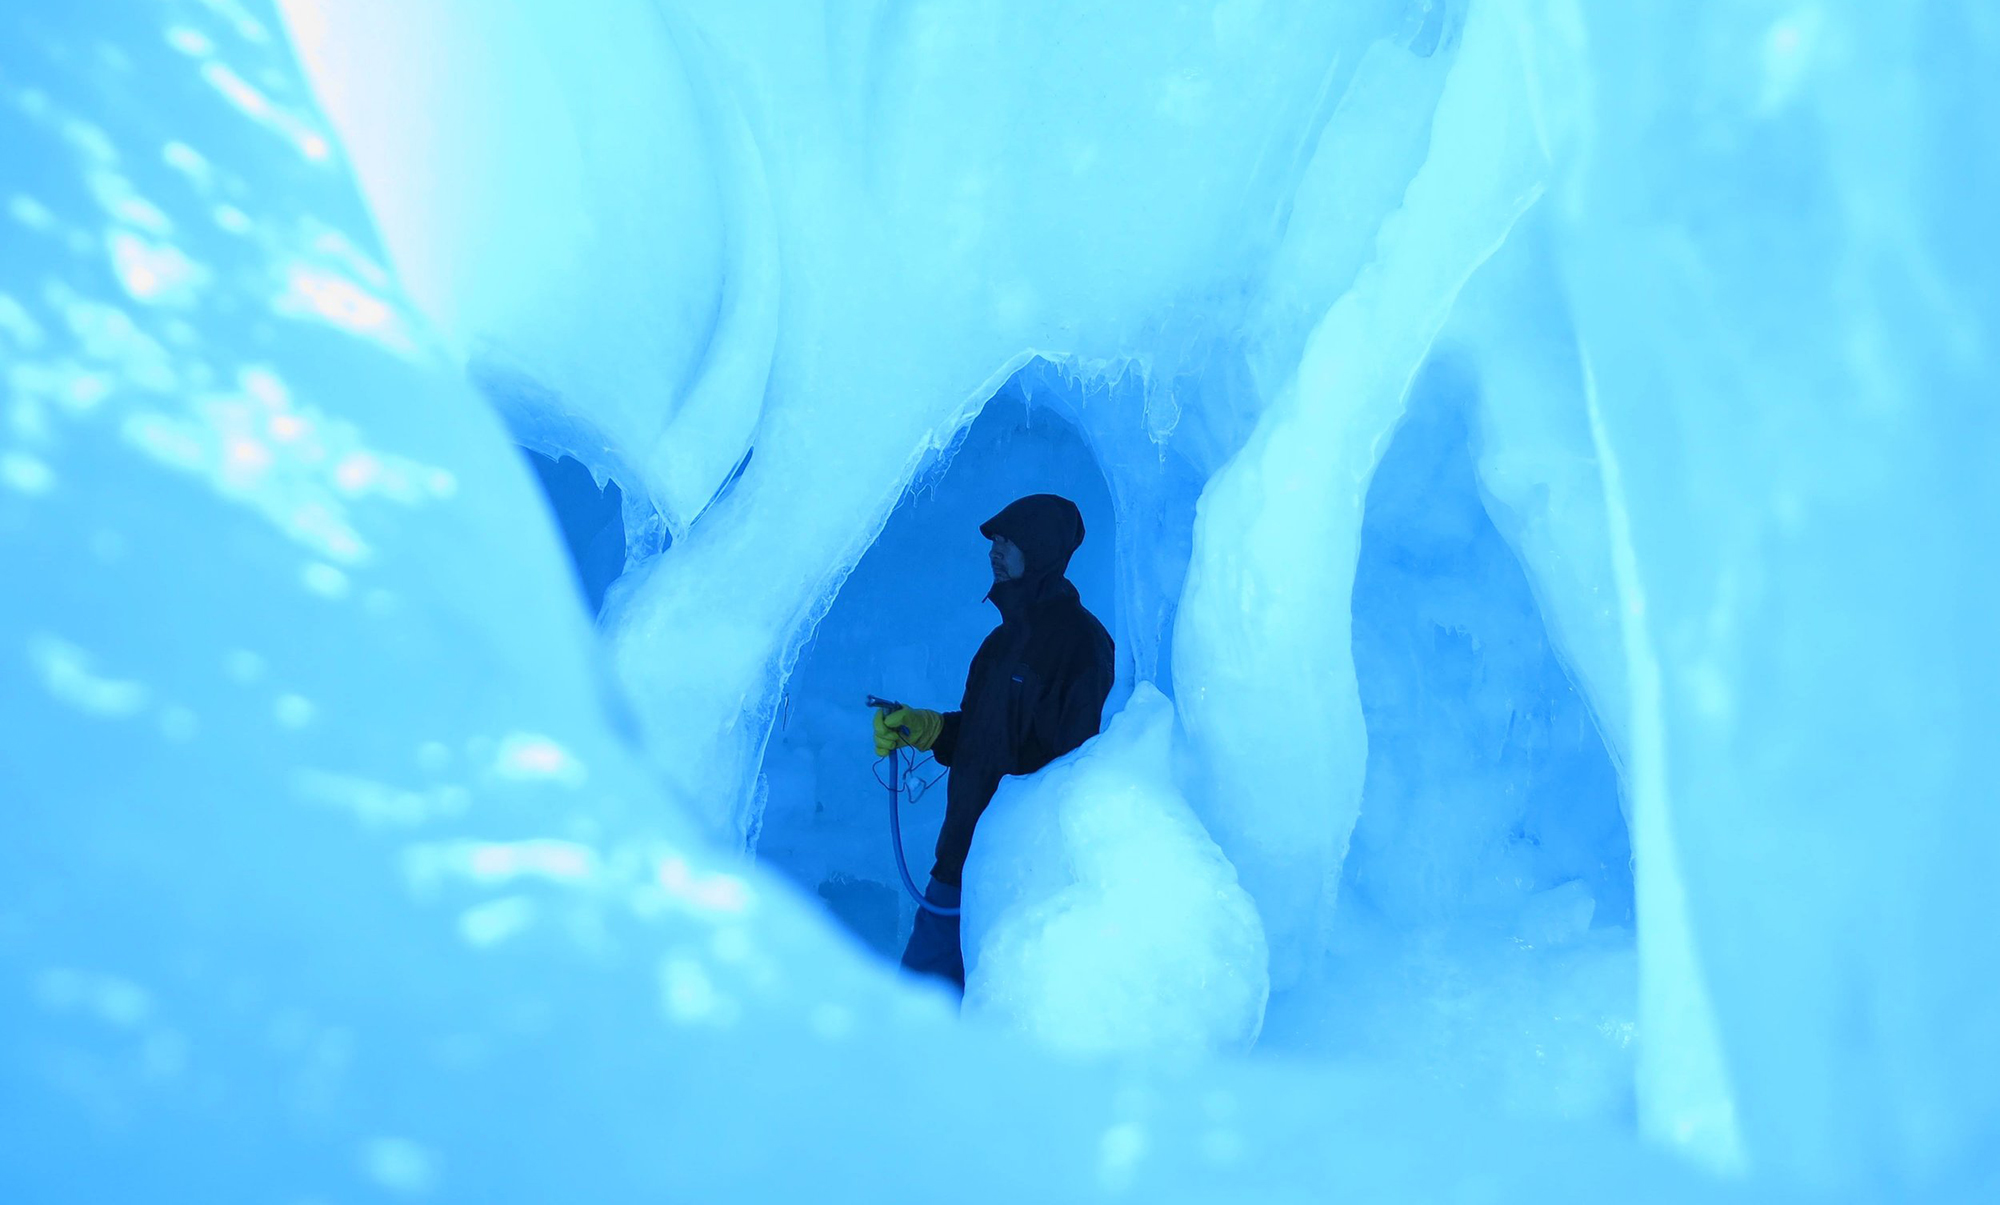 Niseko Ice Village: A creation born of nature and a helping hand